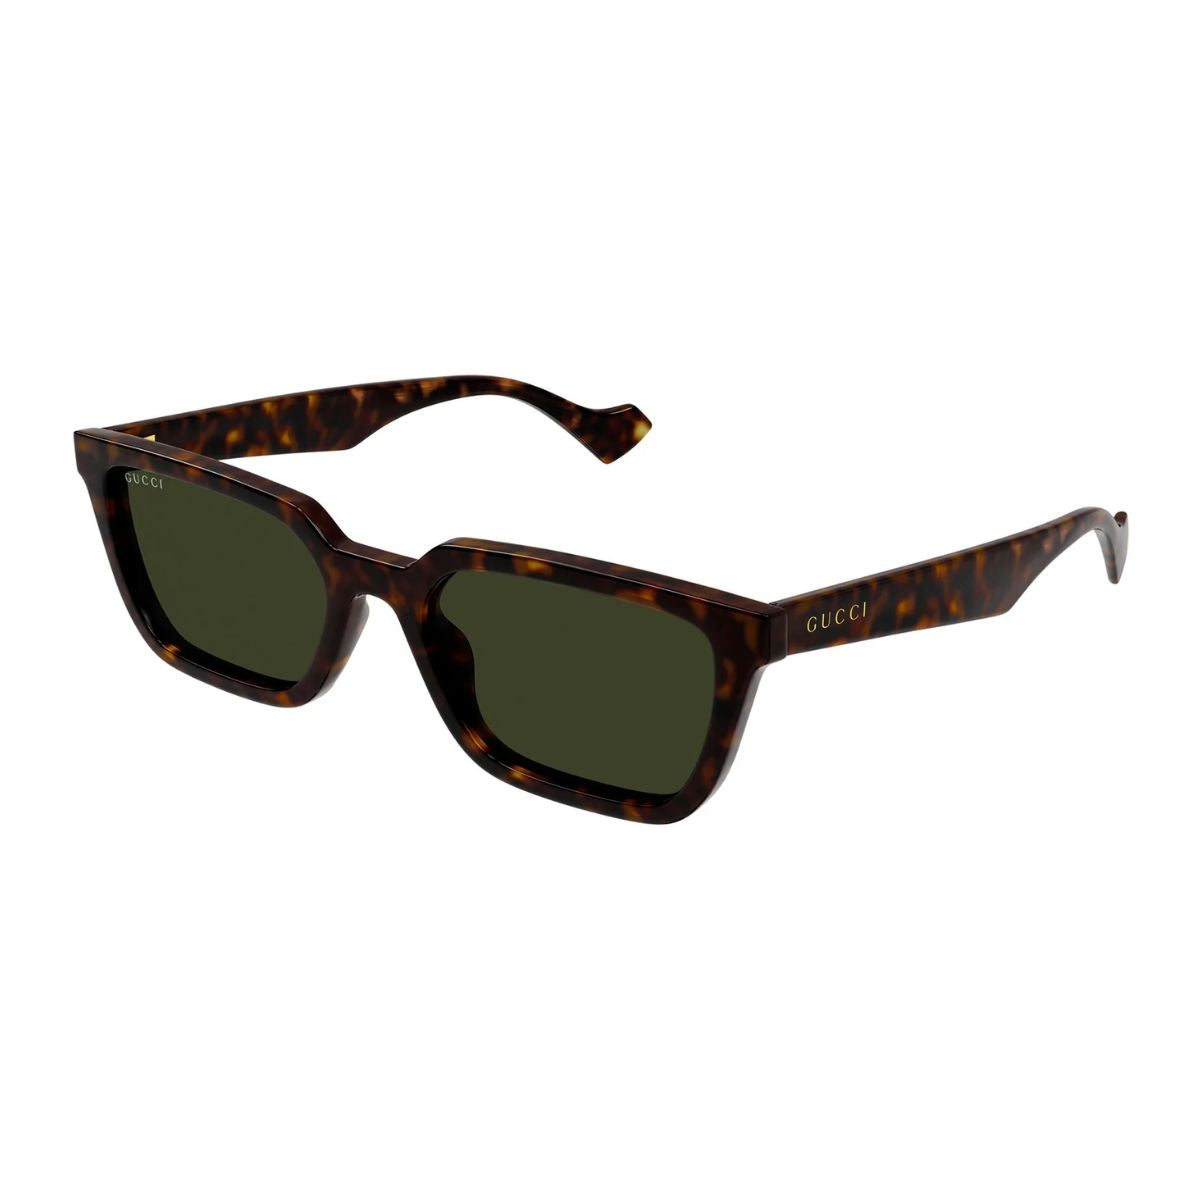 "Trendy Gucci 1539S 002 Sunglasses - Shop the Best Selection"